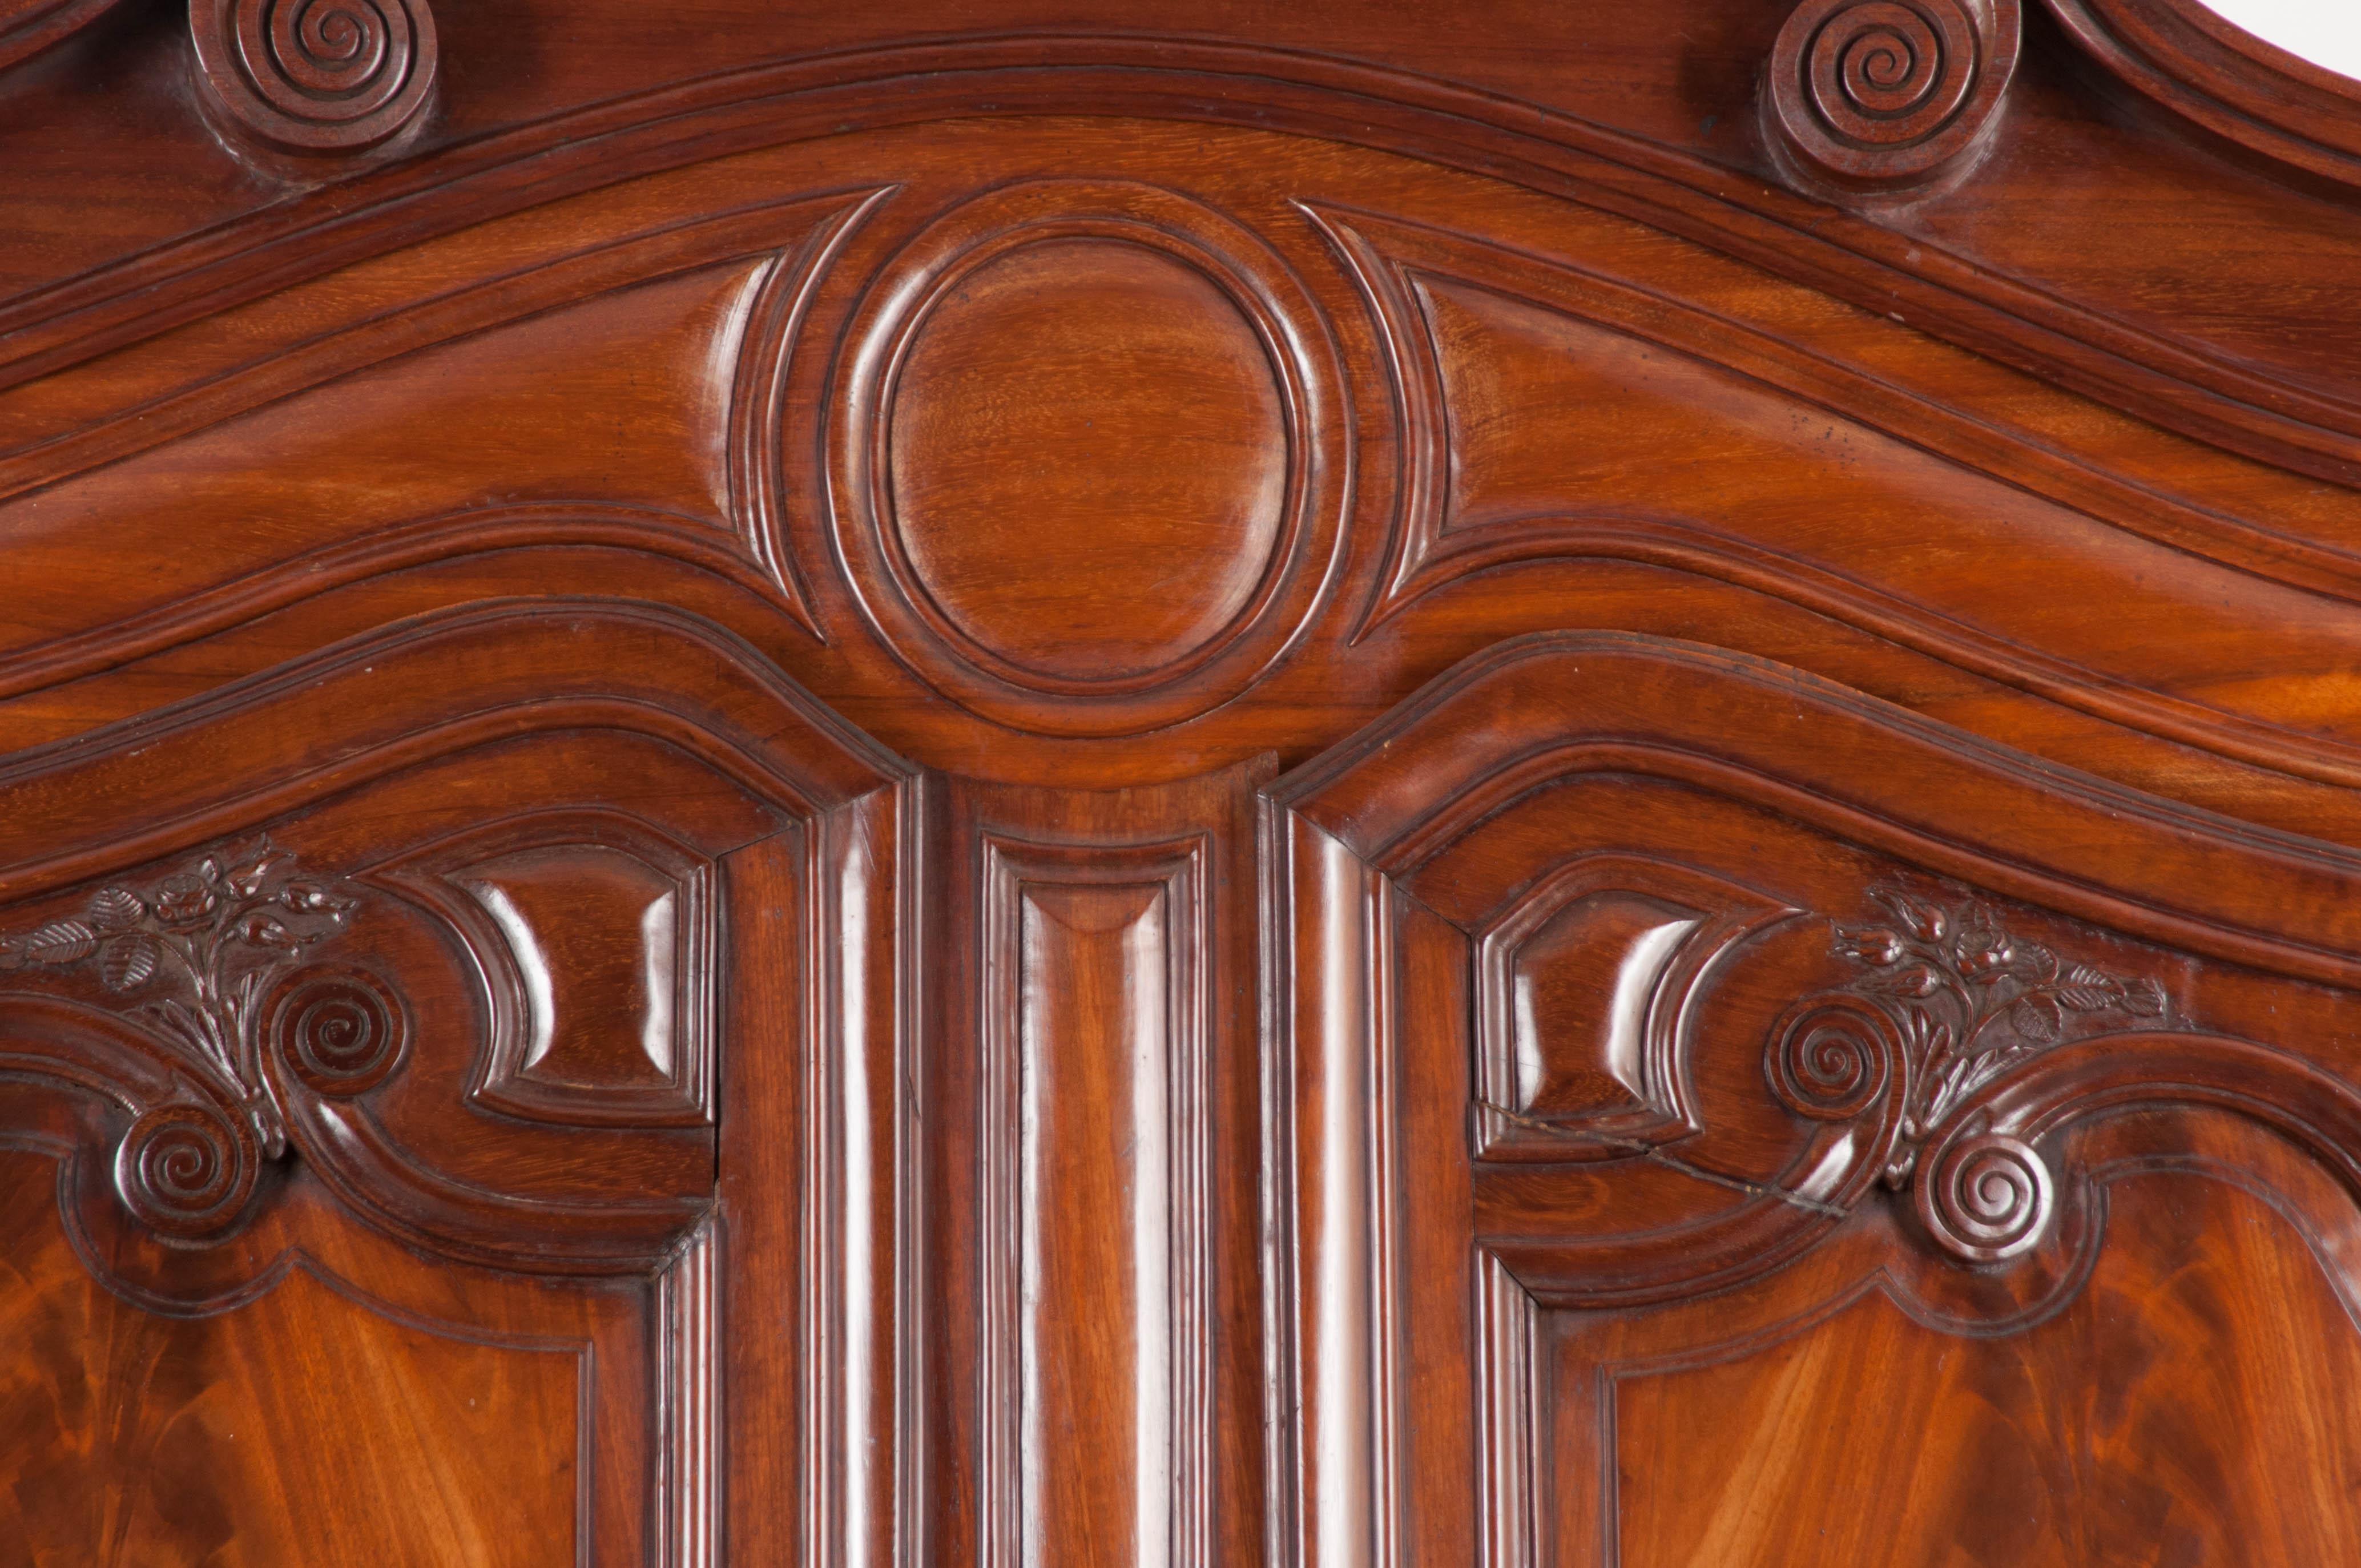 Hand-Carved French 18th Century Mahogany Armoire from the Port of Normandy